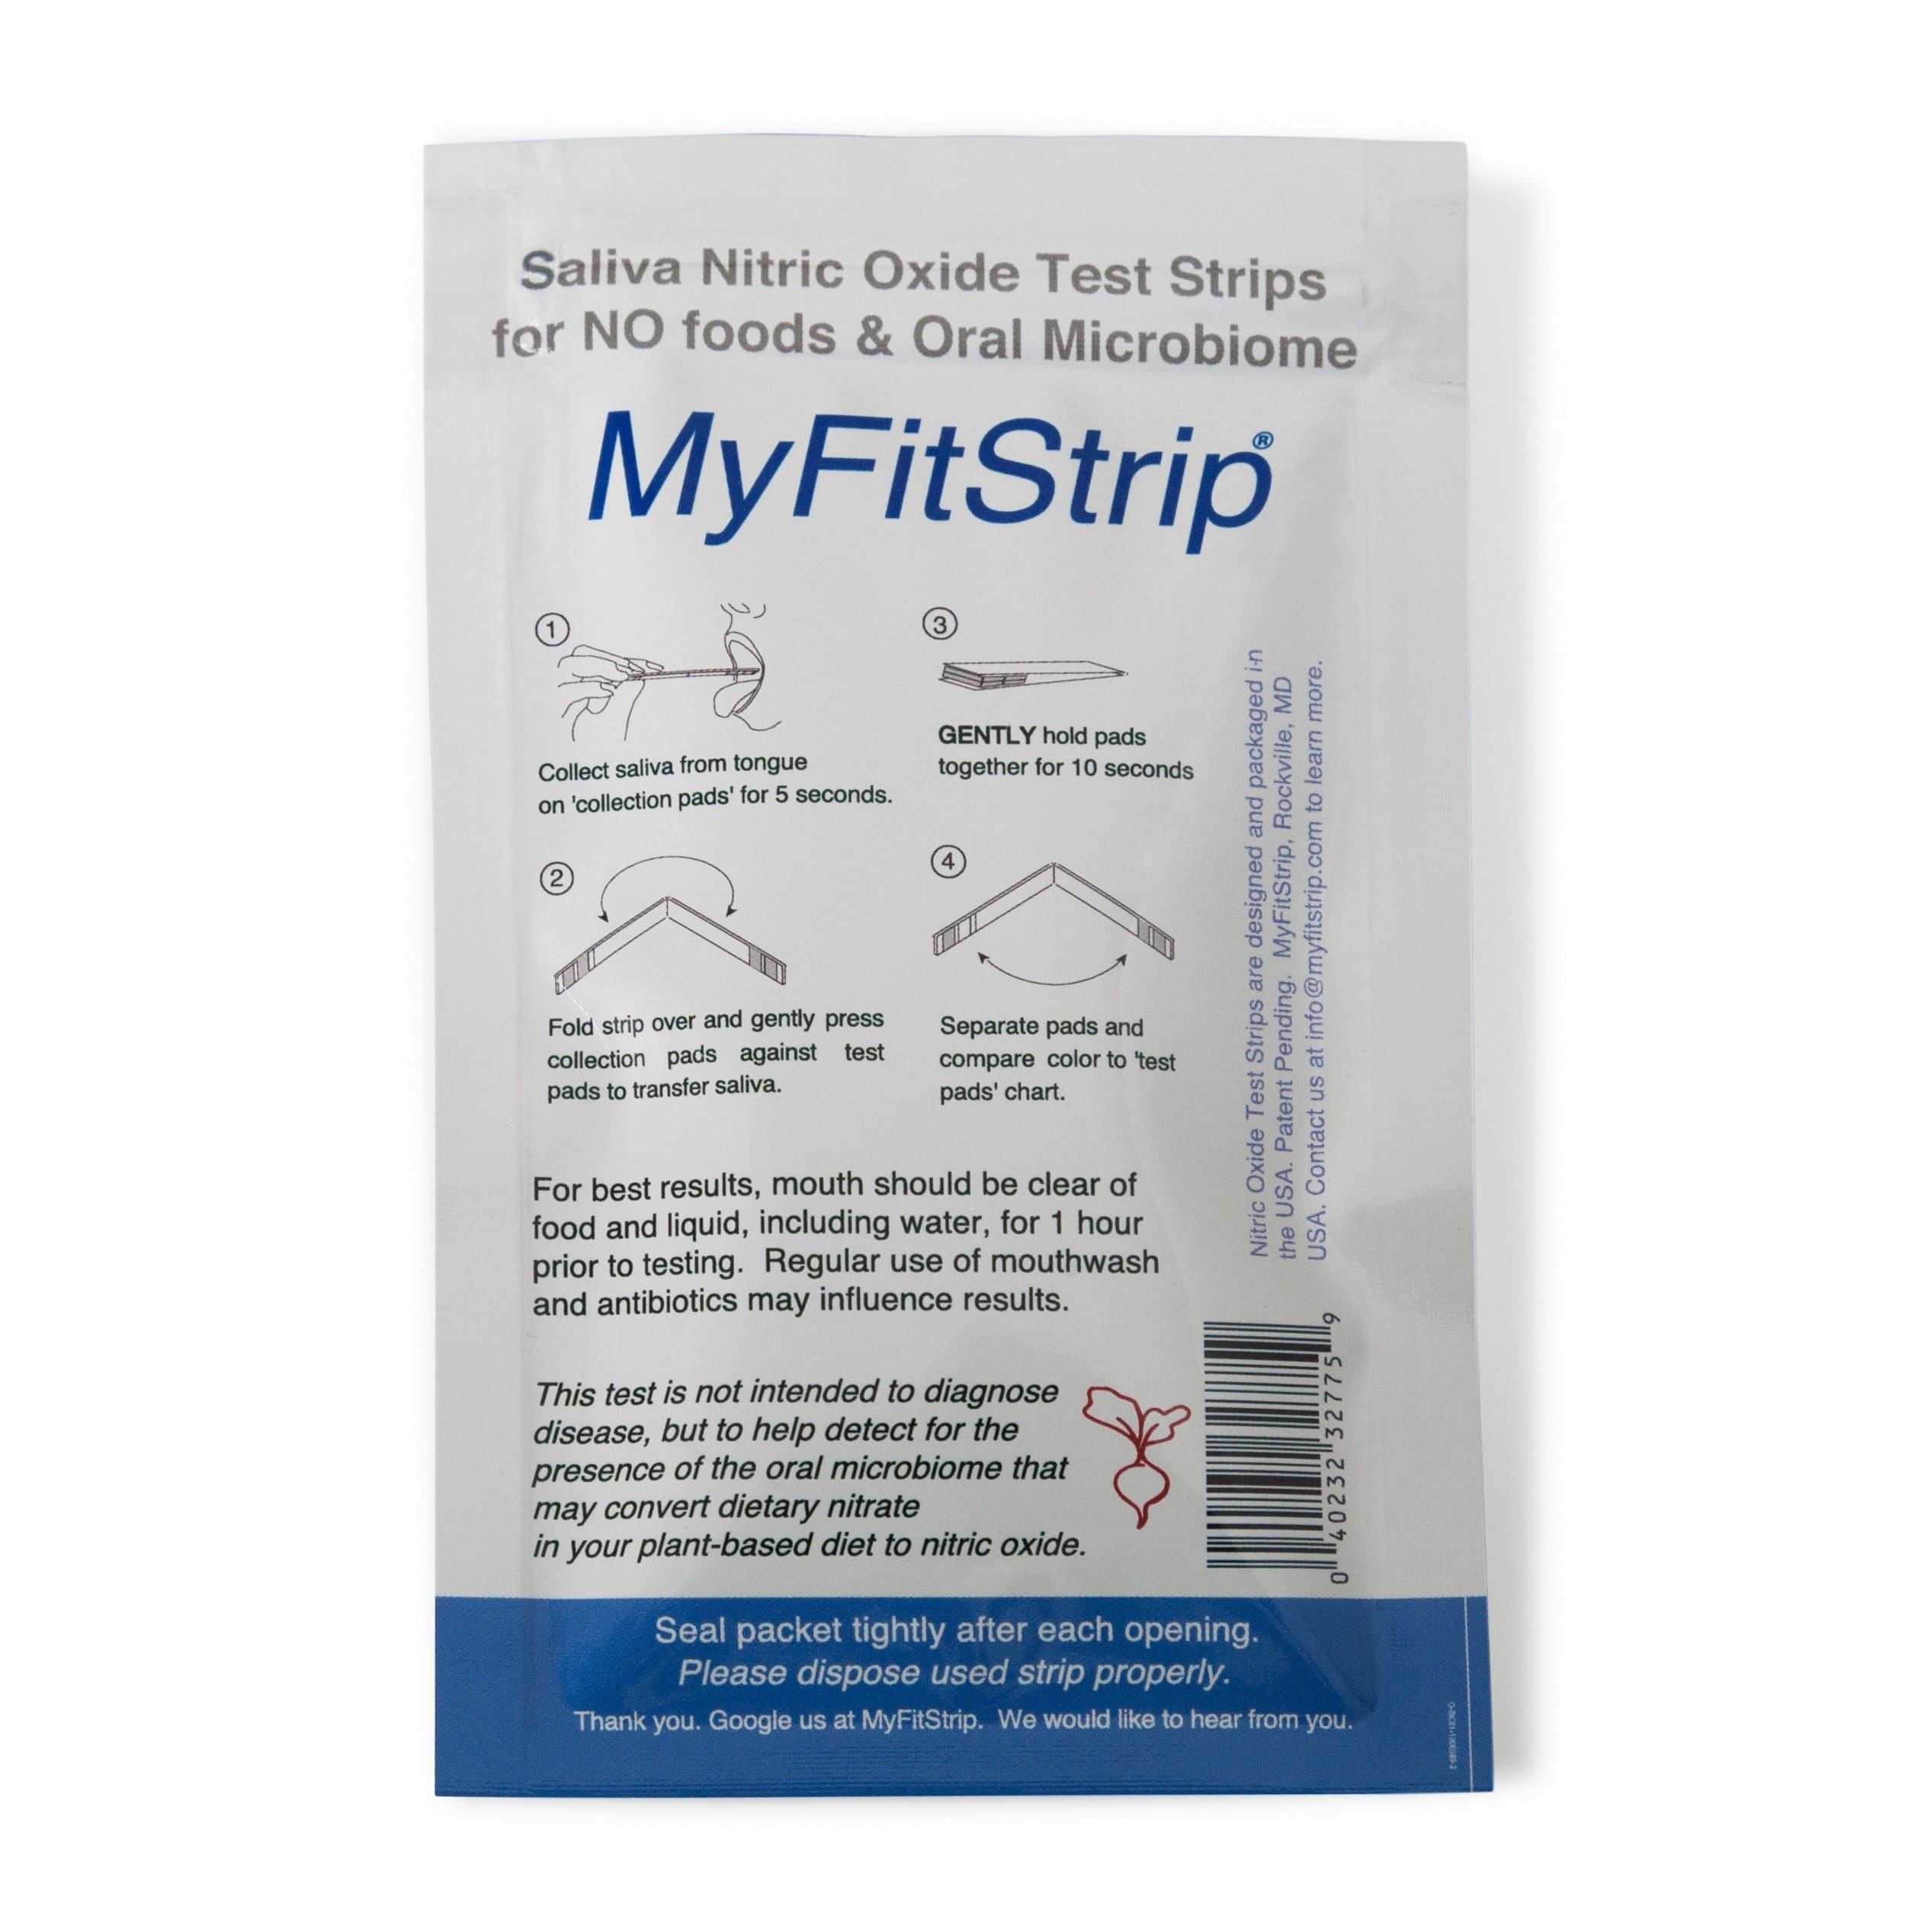 How to use MyFitStrip